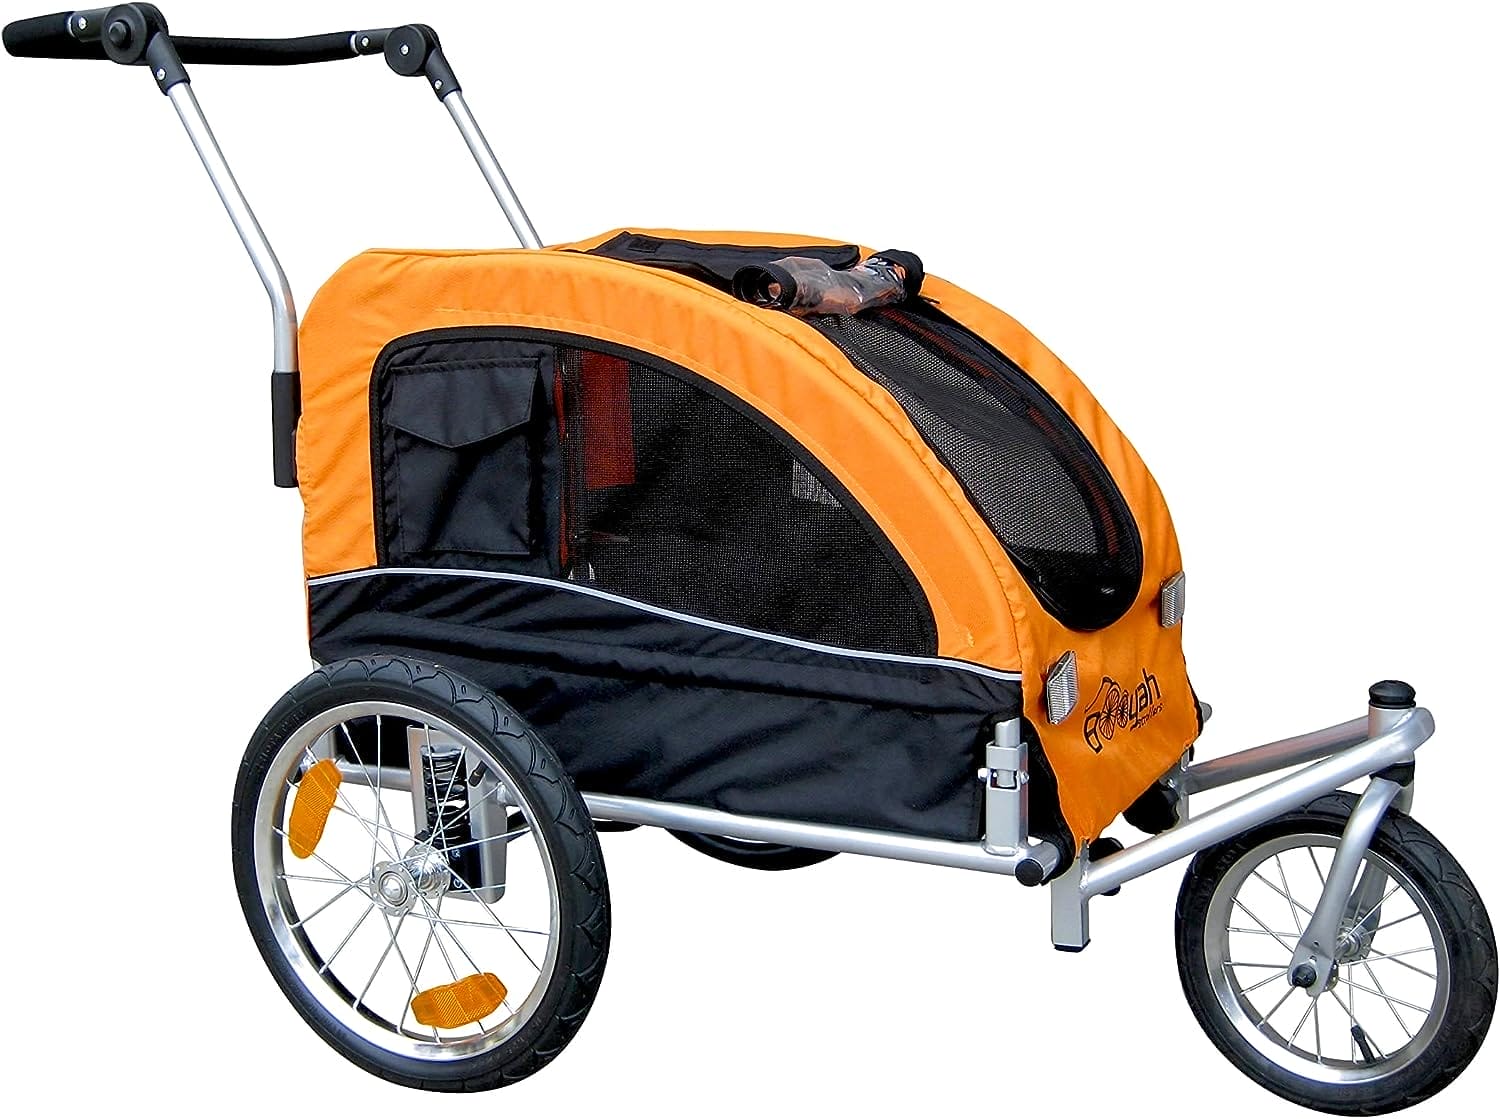 Booyah Medium Dog Stroller Review: Is it Worth the Hype?